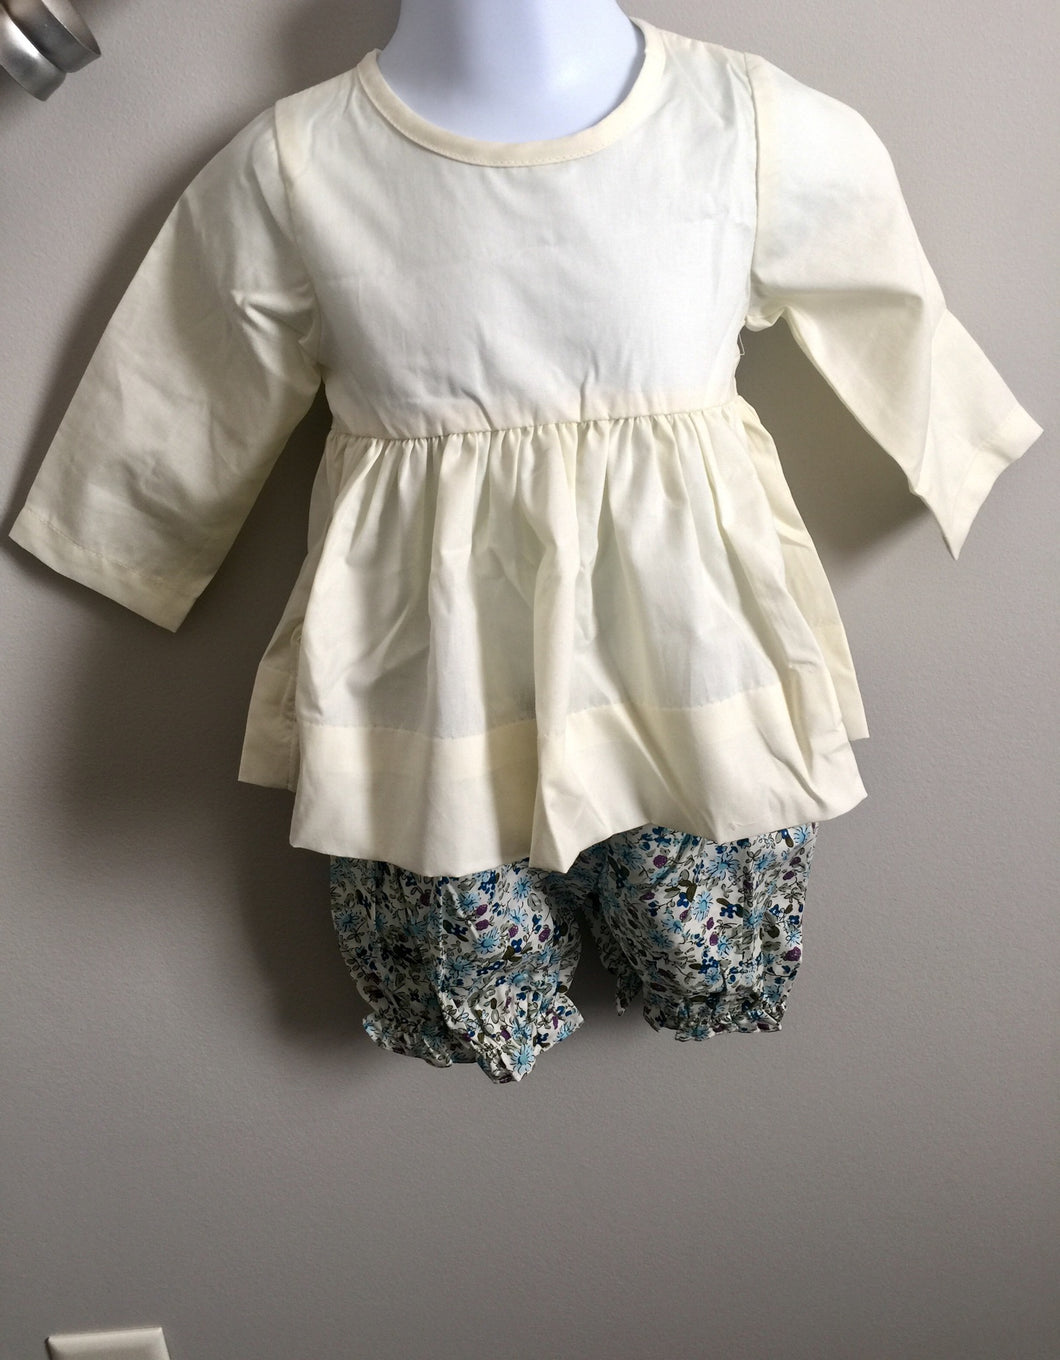 Cream top with floral bubble shorts